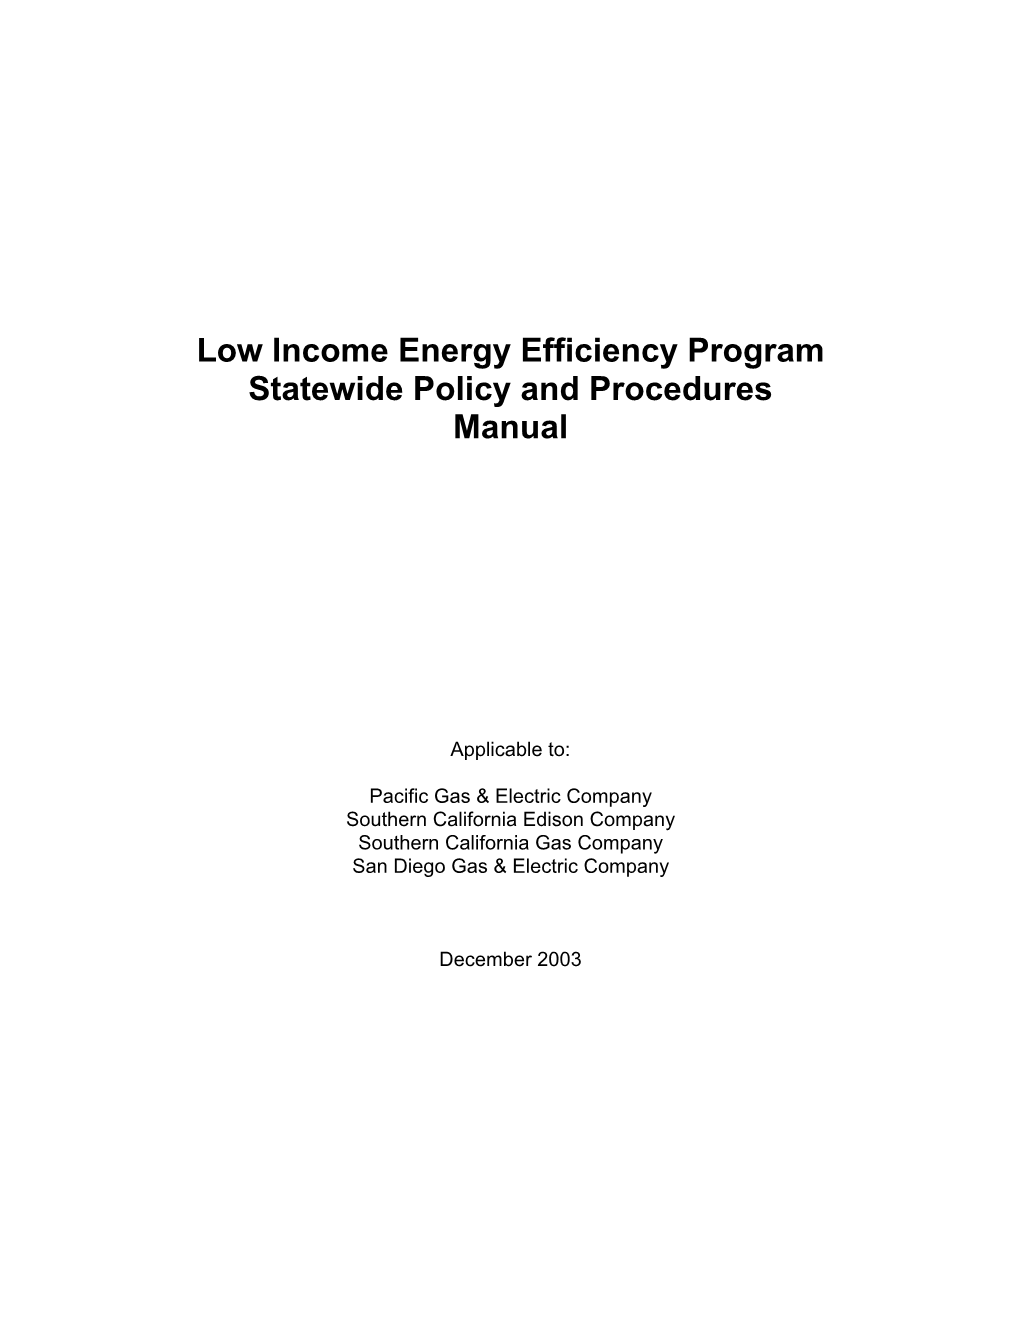 Low Income Energy Efficiency Program Statewide Policy and Procedures Manual